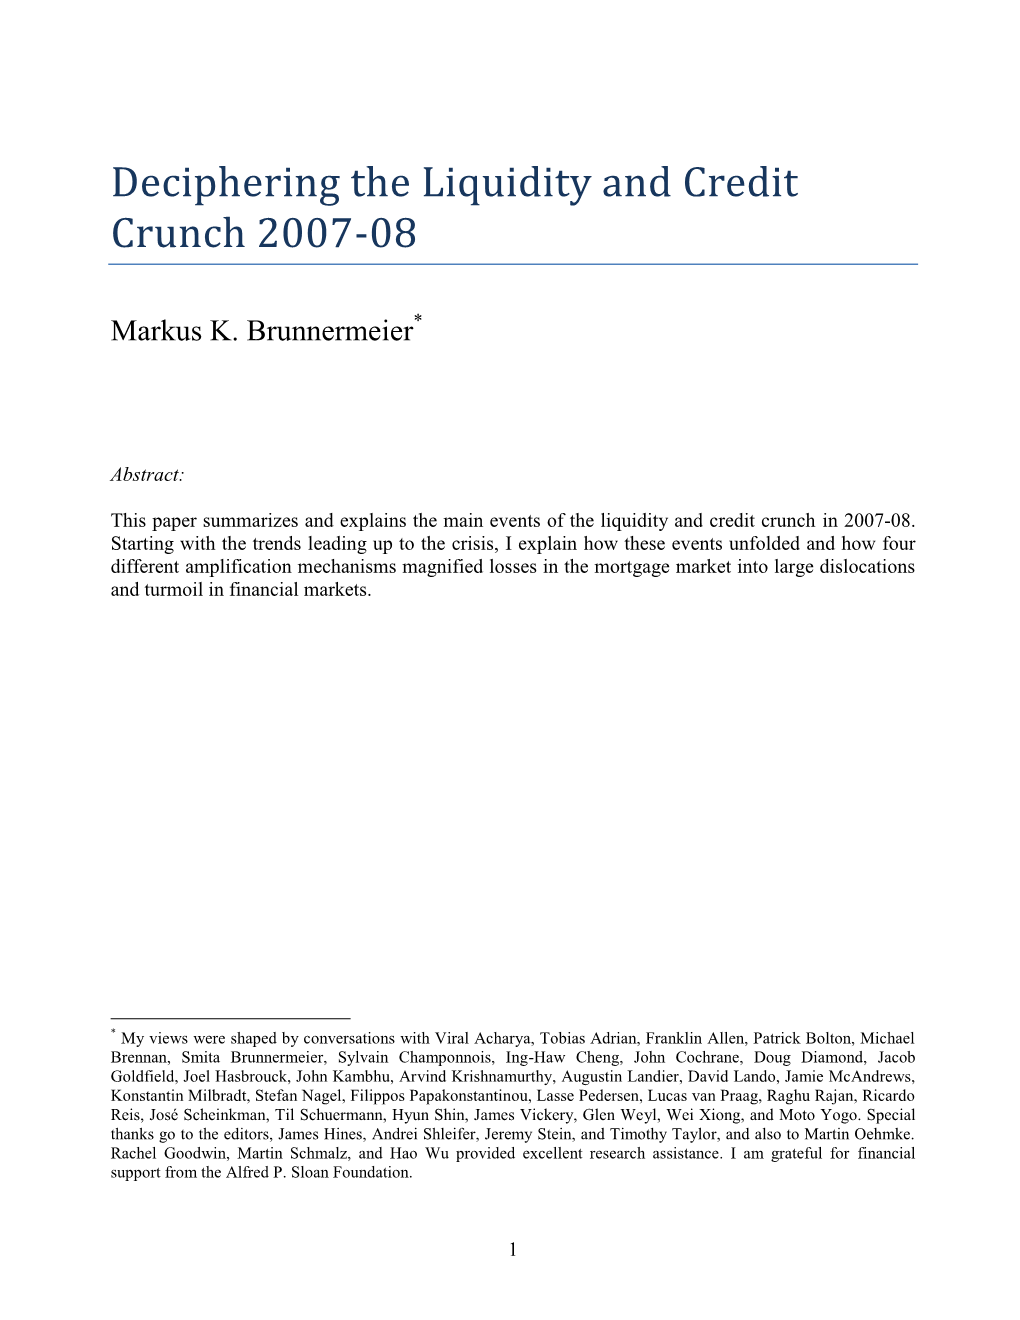 Deciphering the 2007-08 Liquidity and Credit Crunch‘, Working Paper Version